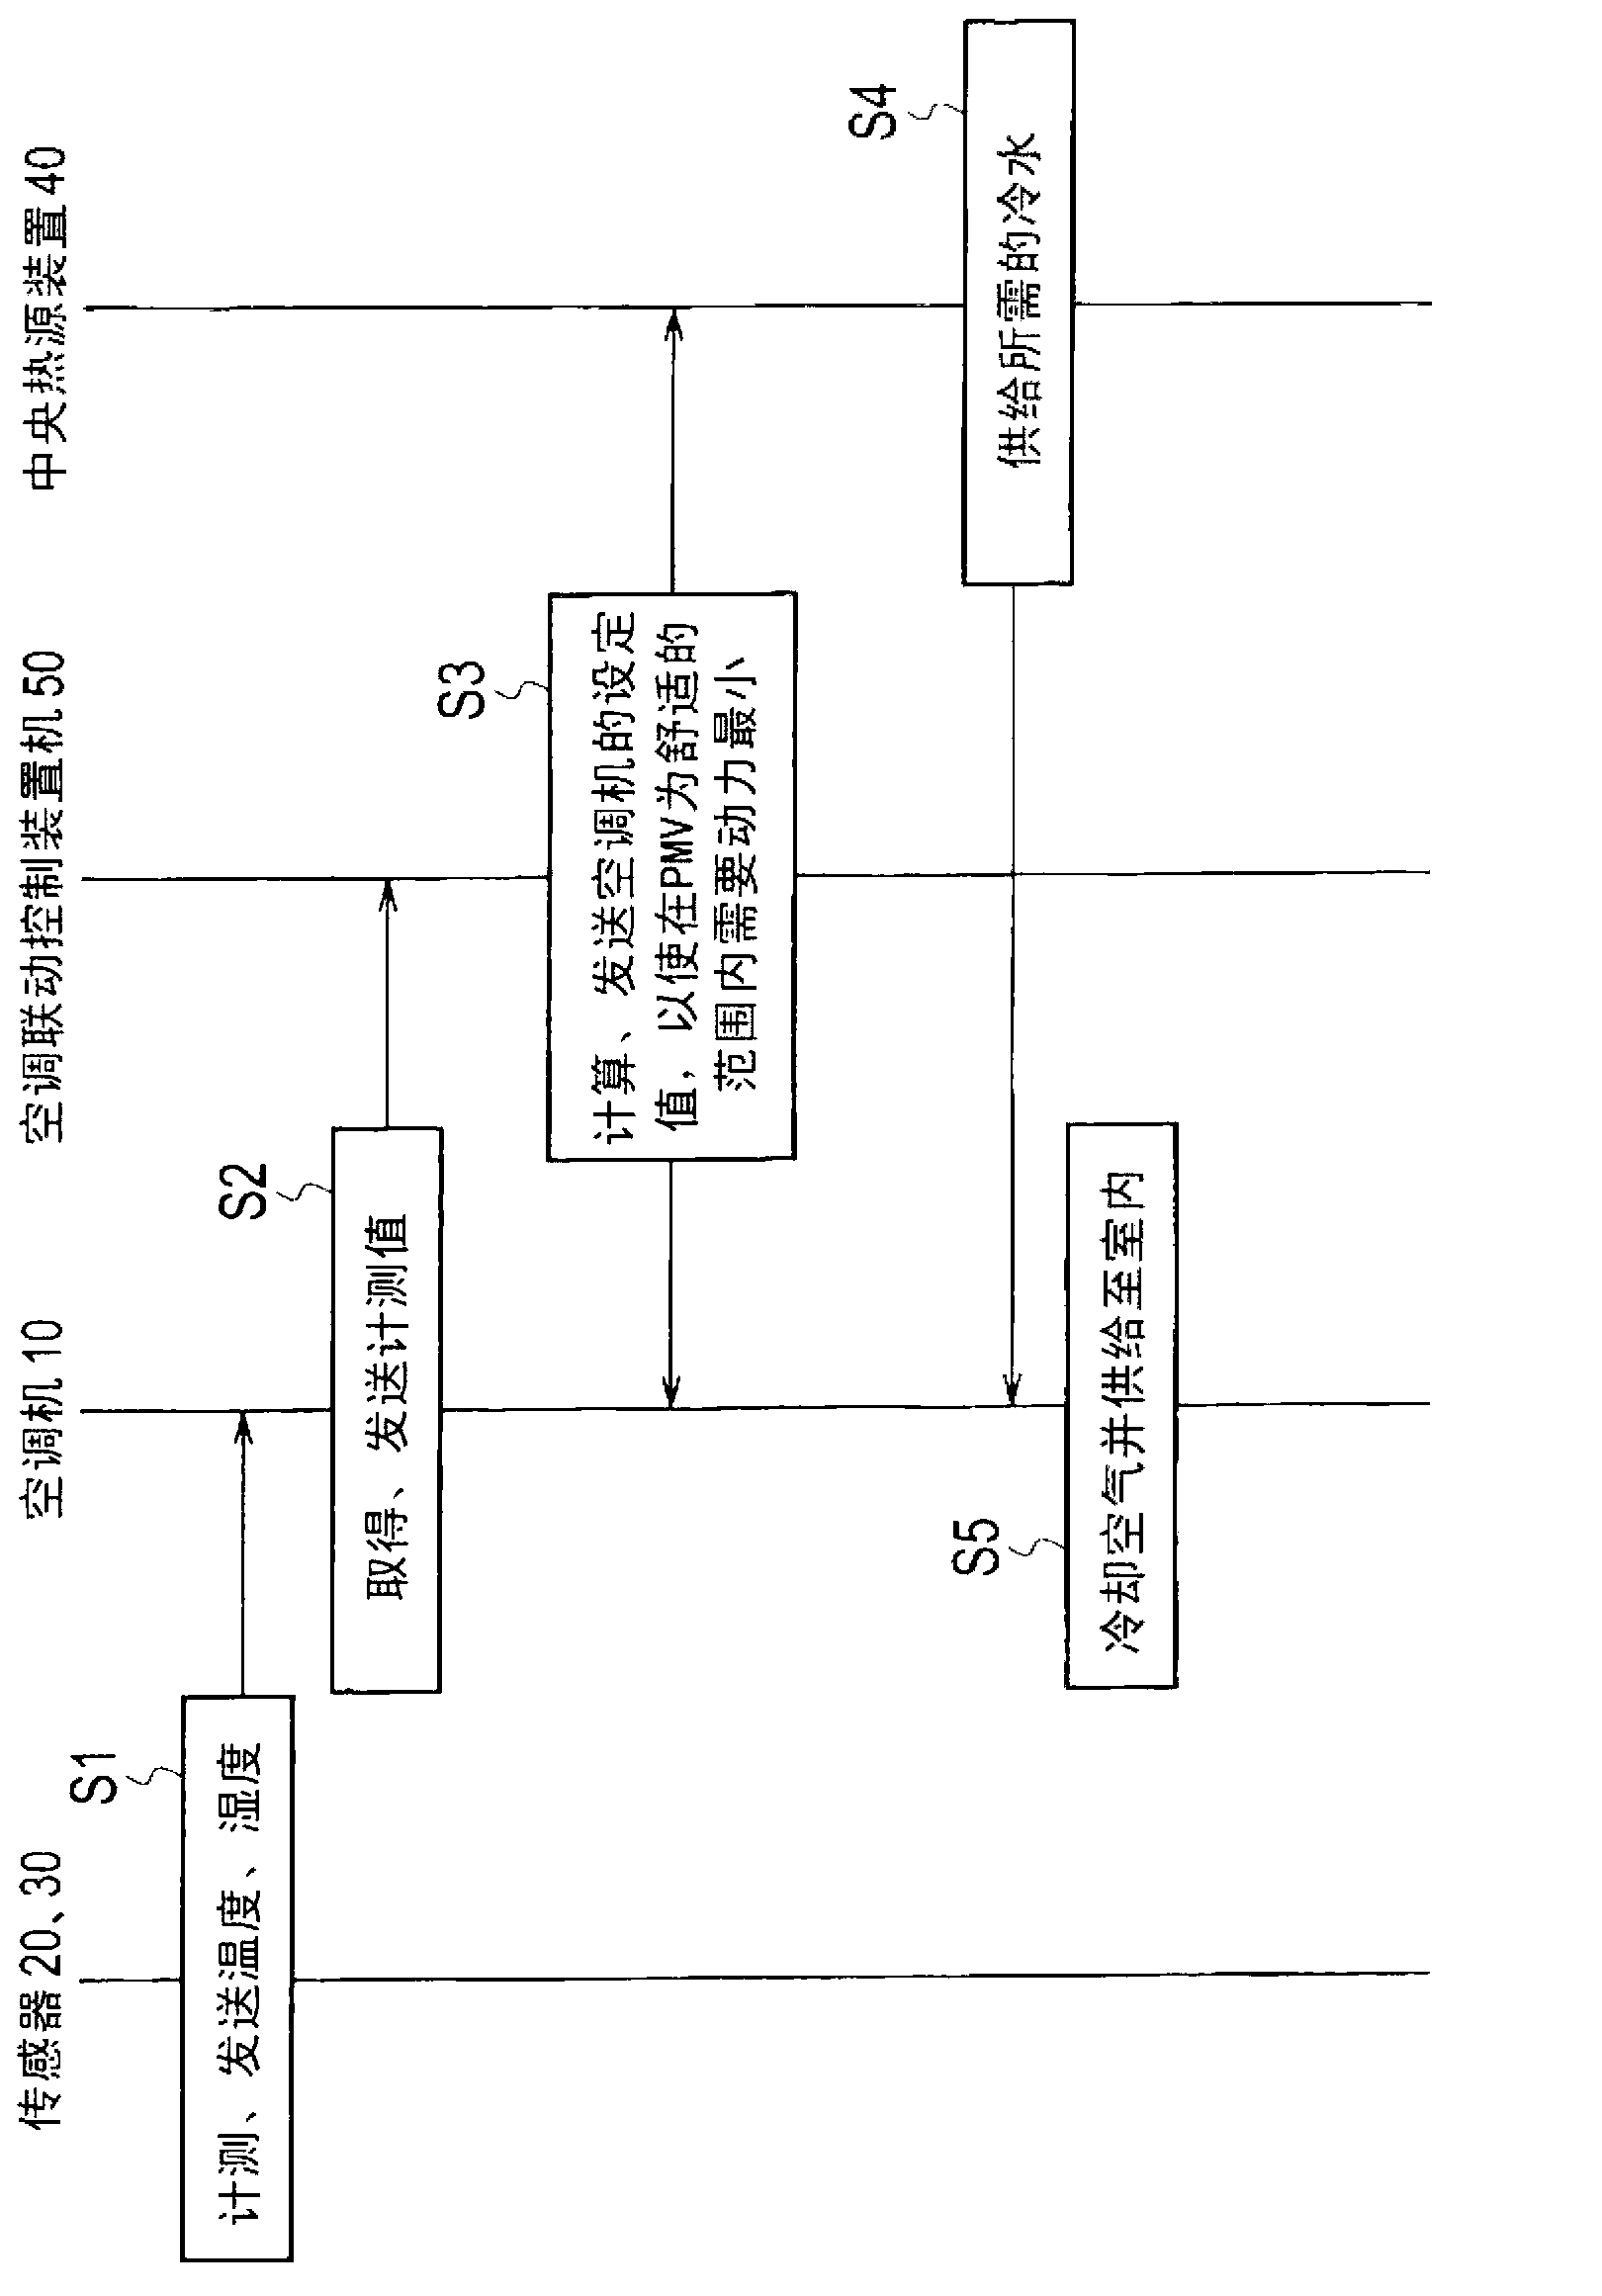 Air-conditioning control system